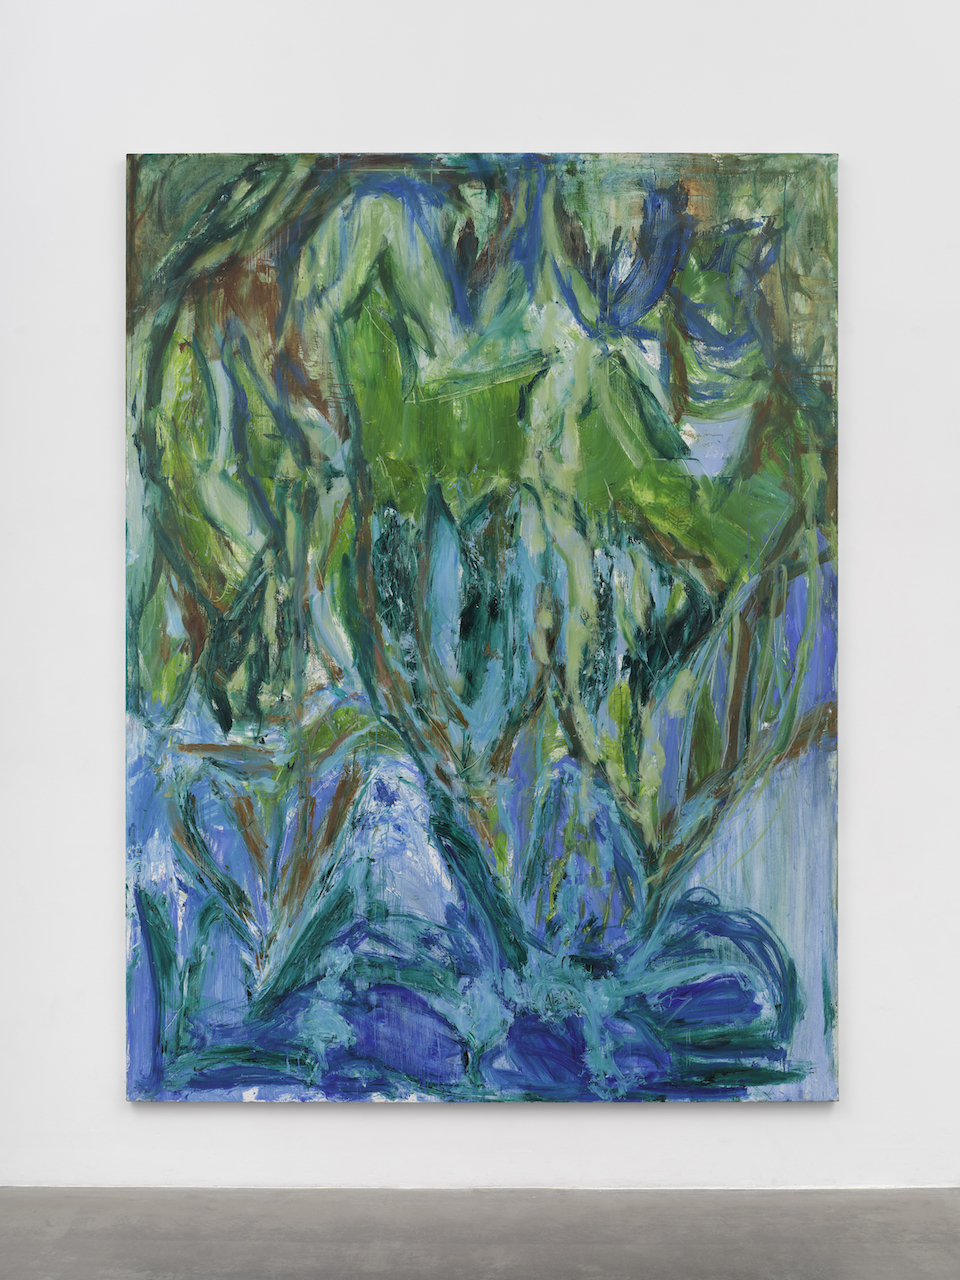 The Wick - Sarah Cunningham, Treading Water, 2024. Oil on canvas. 320 x 240 x 4 cm, 126 x 94 1/2 x 1 5/8 in. © Sarah Cunningham, courtesy Lisson Gallery